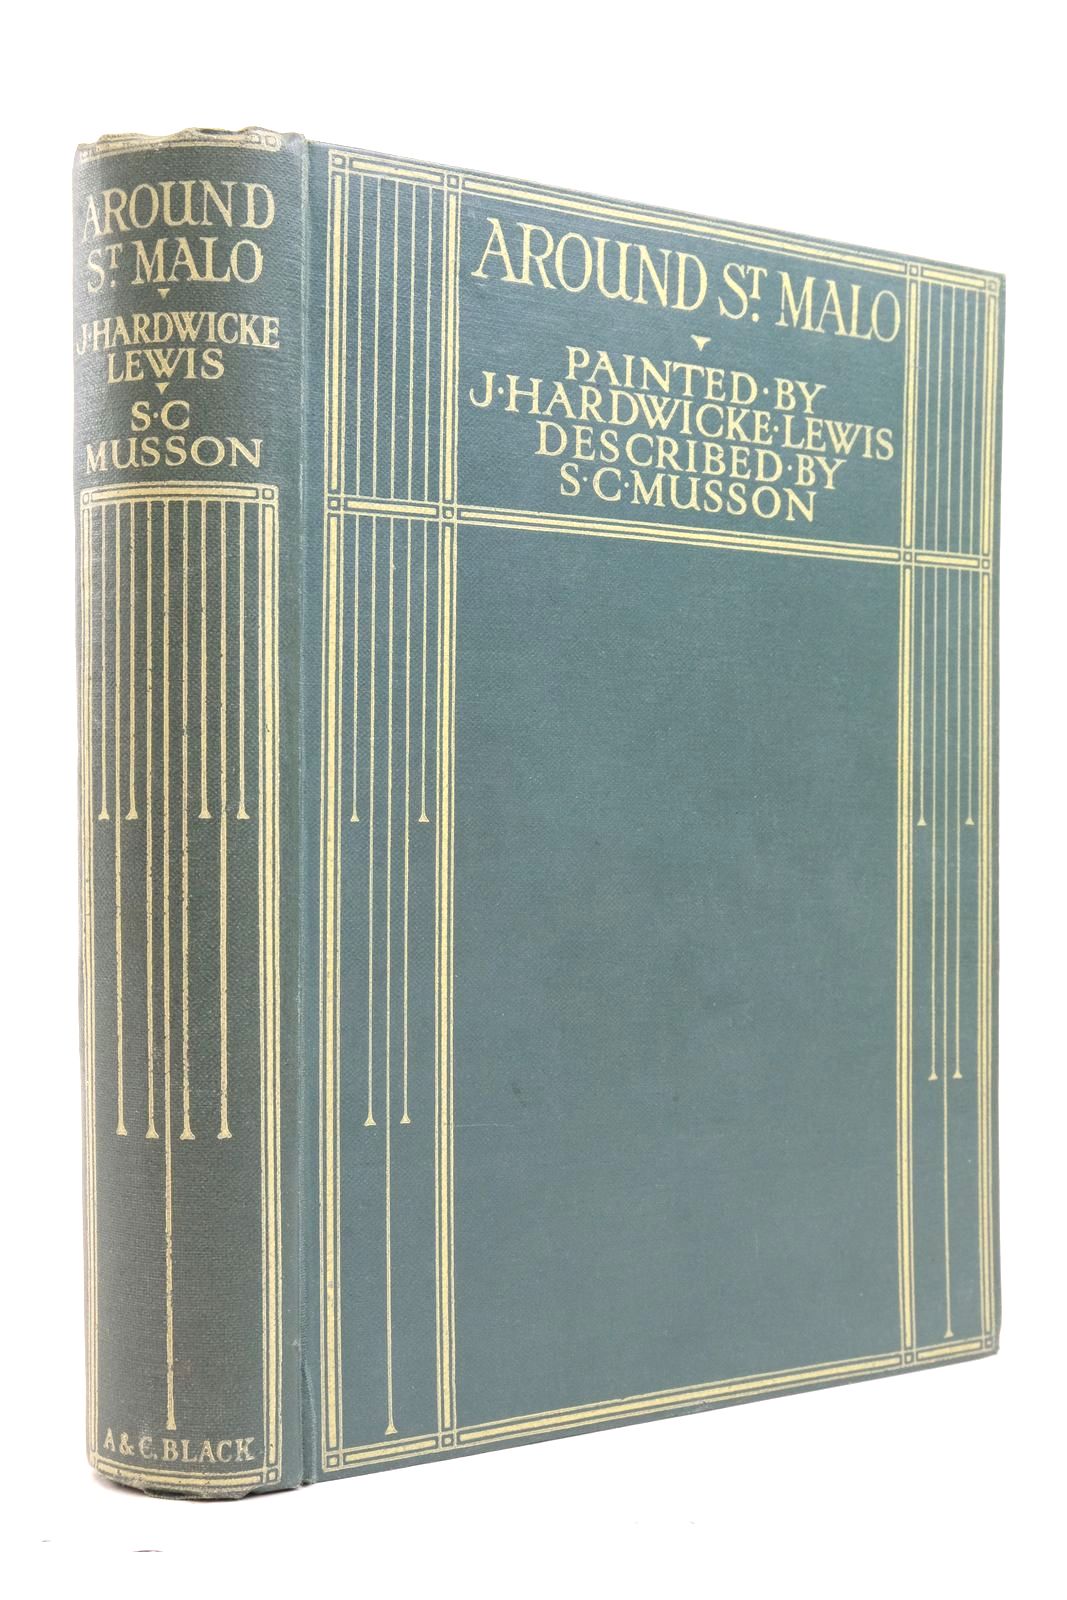 Photo of AROUND ST. MALO written by Musson, Spencer illustrated by Lewis, J. Hardwicke published by A. & C. Black Ltd. (STOCK CODE: 2137417)  for sale by Stella & Rose's Books